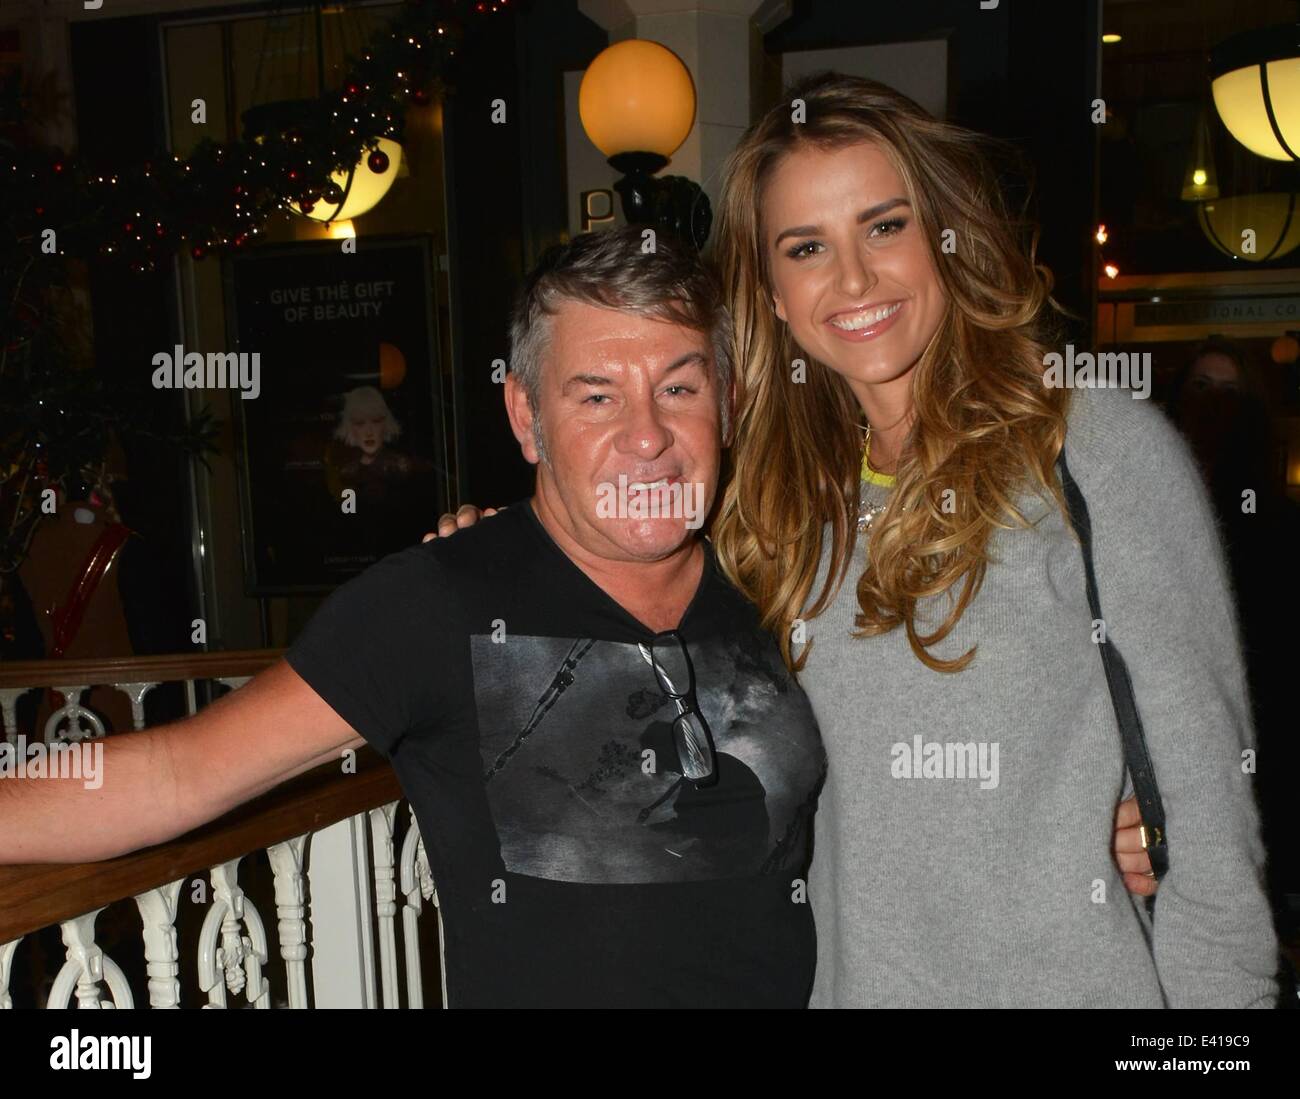 Celebrity couple Brian McFadden & wife Vogue Williams McFadden looked all spruced-up for the Festive Season with his-and-hers hair cuts from Ireland's top stylist Michael Doyle at Peter Mark Stephens Green Shopping Centre...  Featuring: Michael Doyle,Vogu Stock Photo